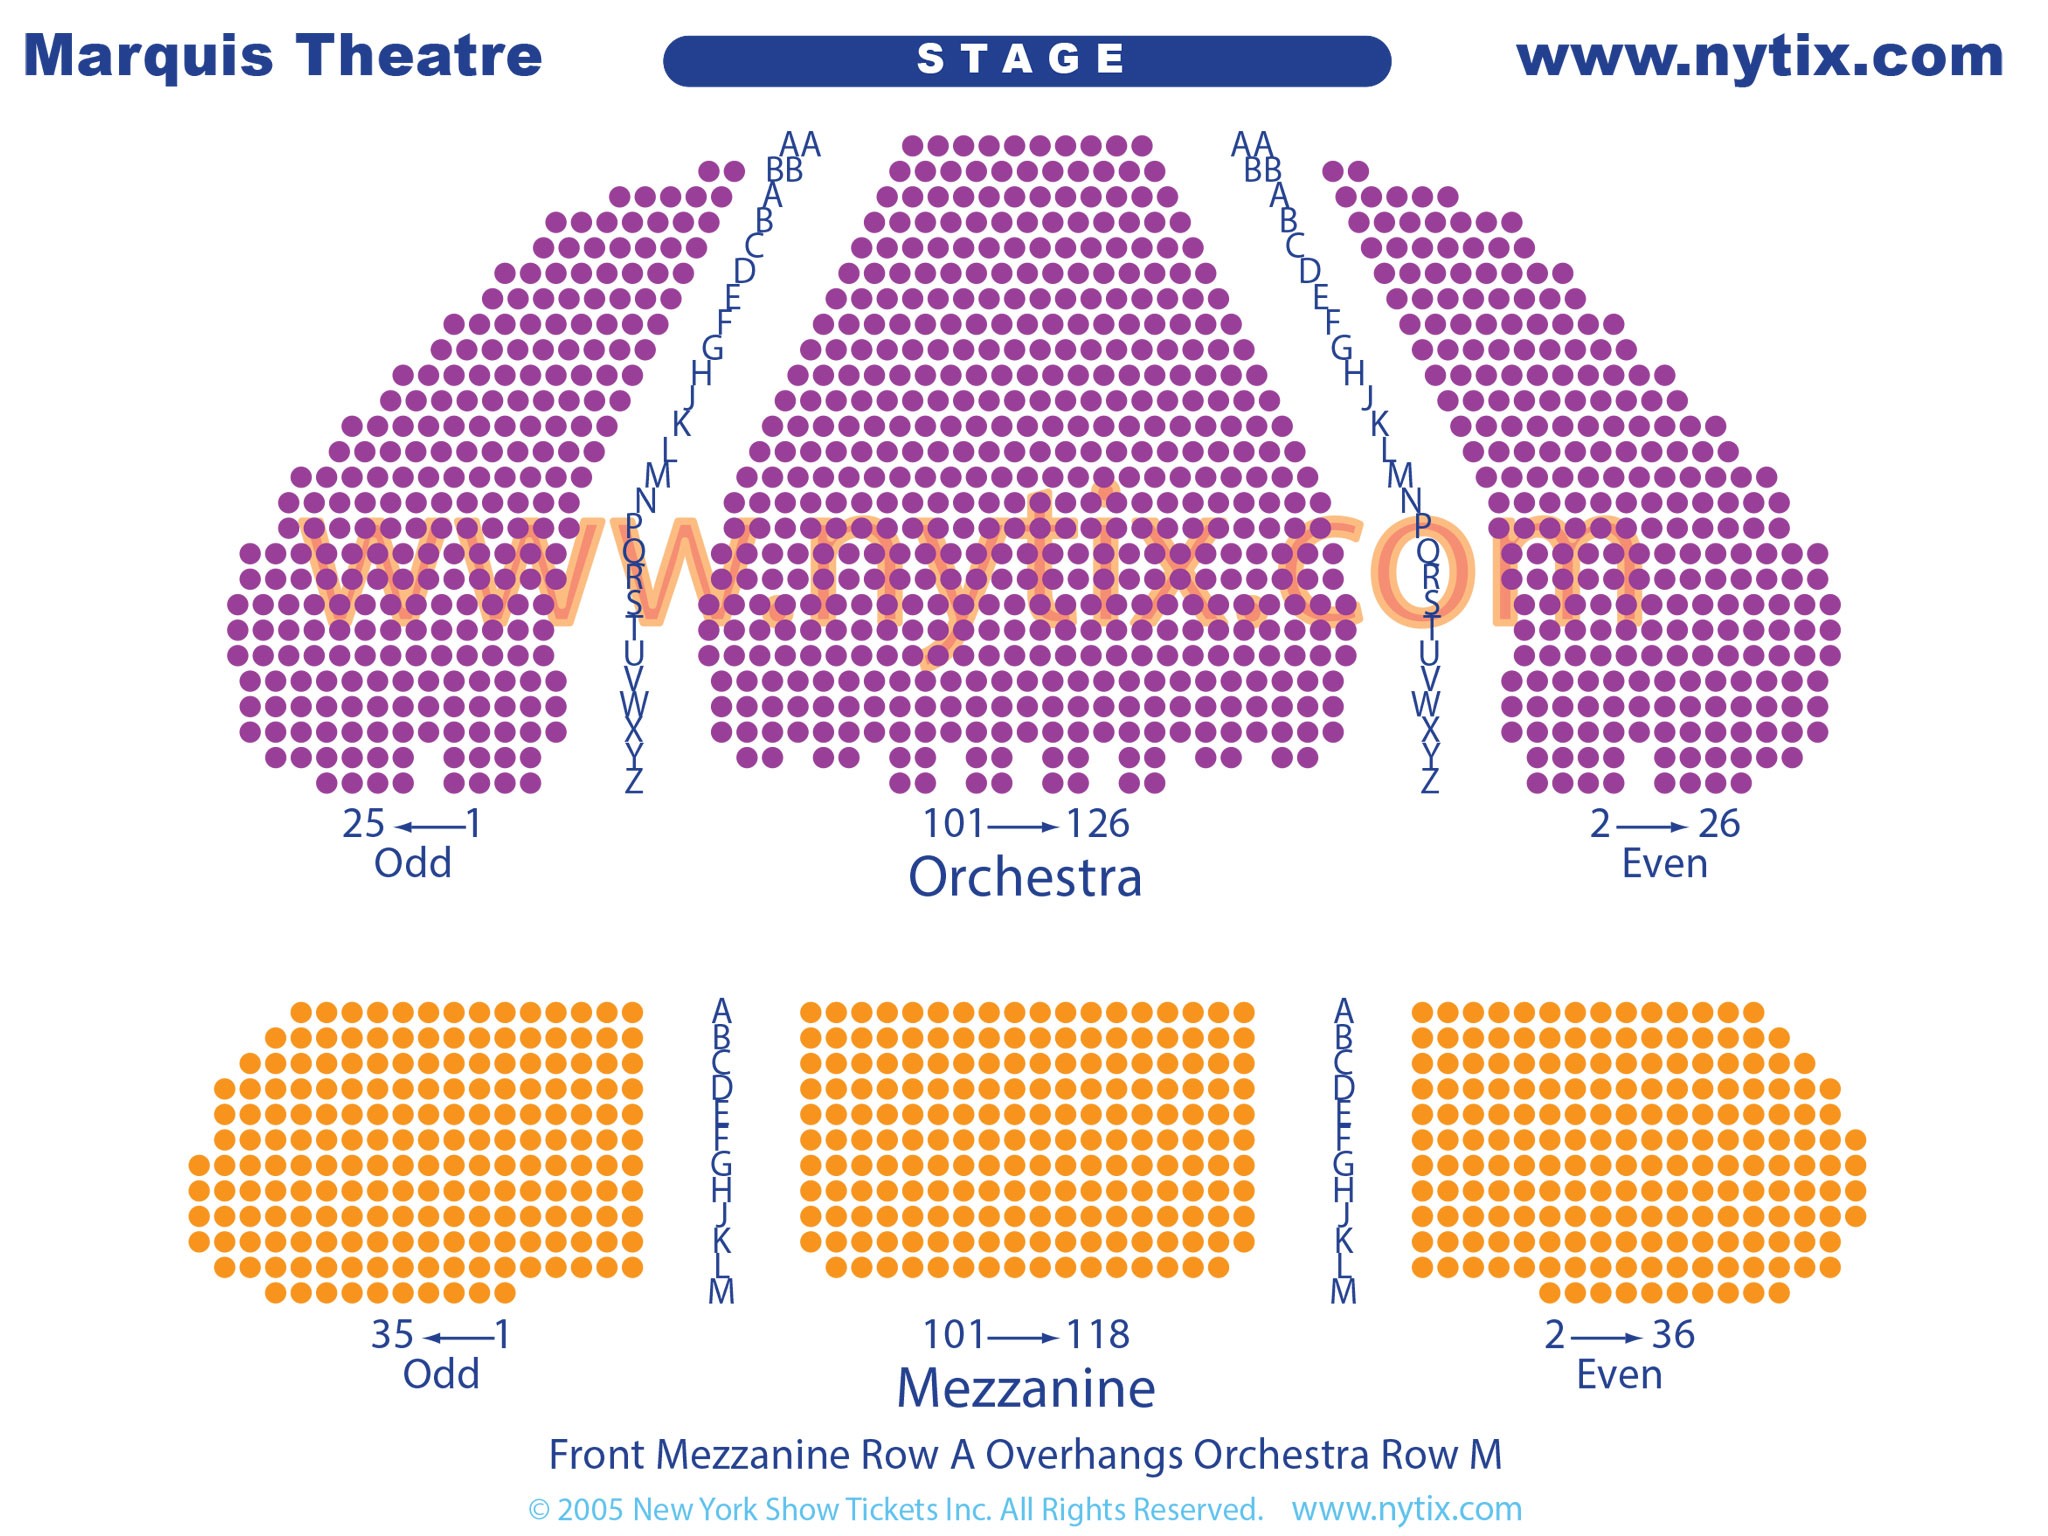 Broadway Theatre Marquis Seating Chart